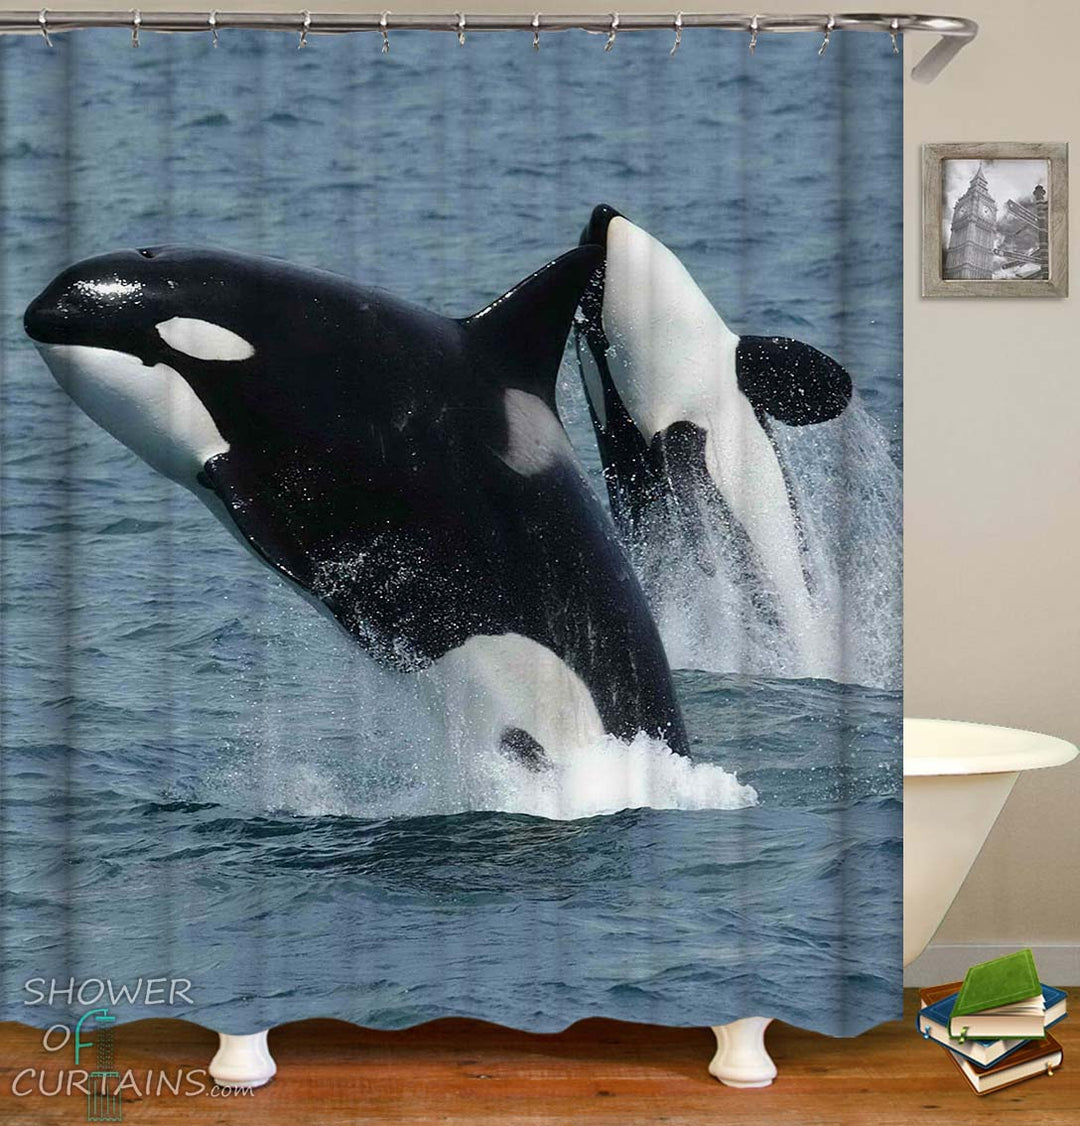 Whale Shower Curtains – Shower of Curtains